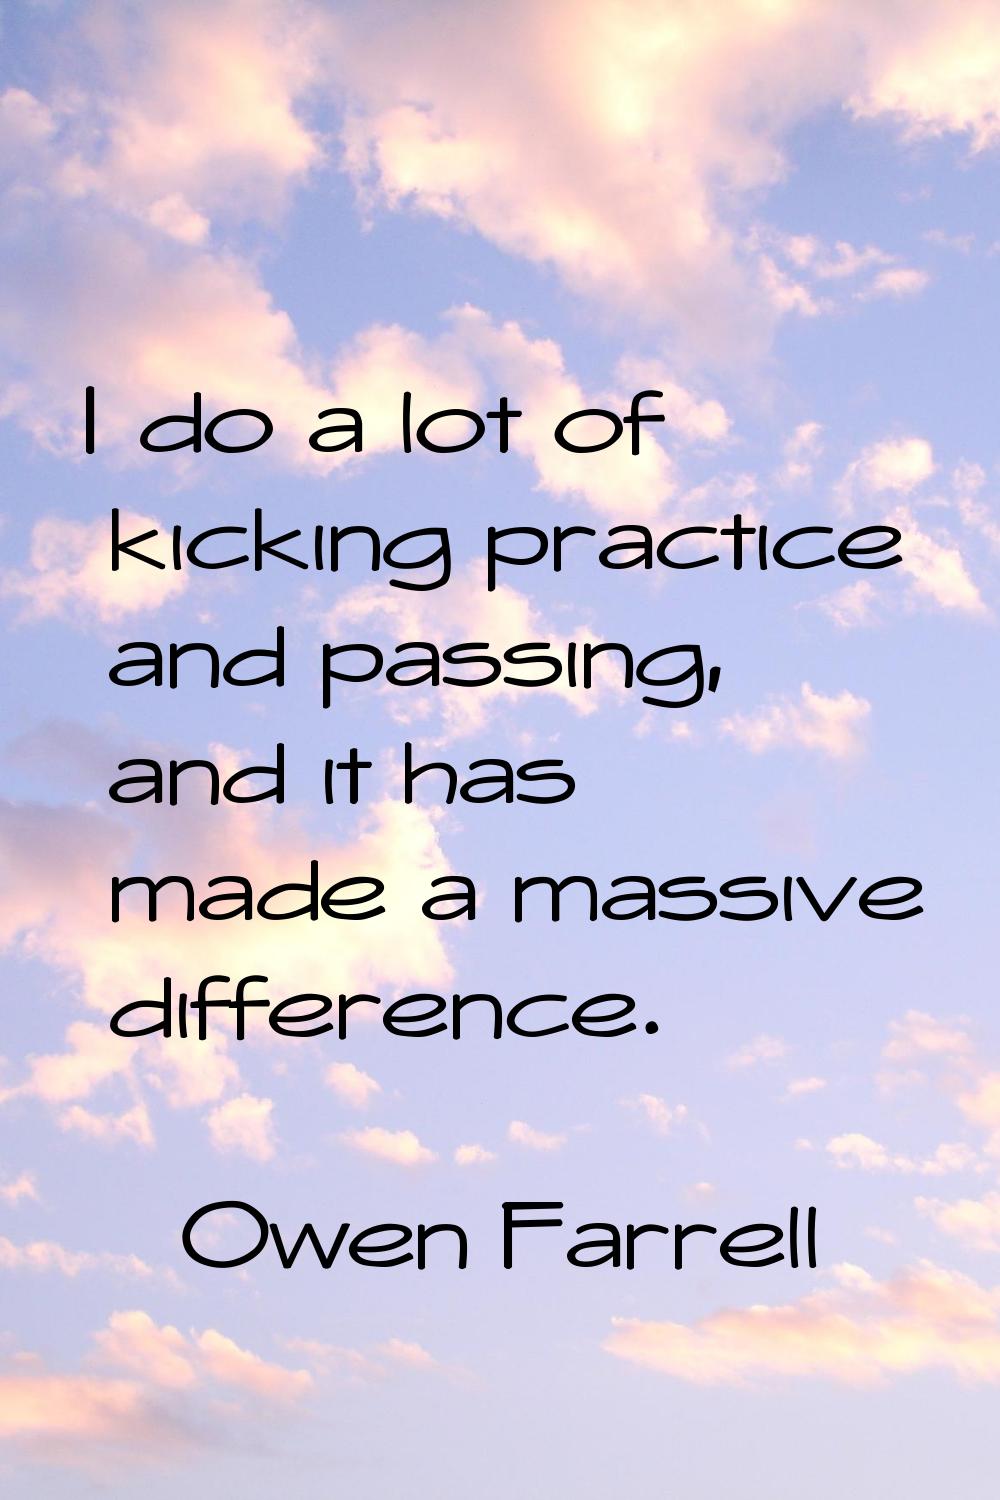 I do a lot of kicking practice and passing, and it has made a massive difference.